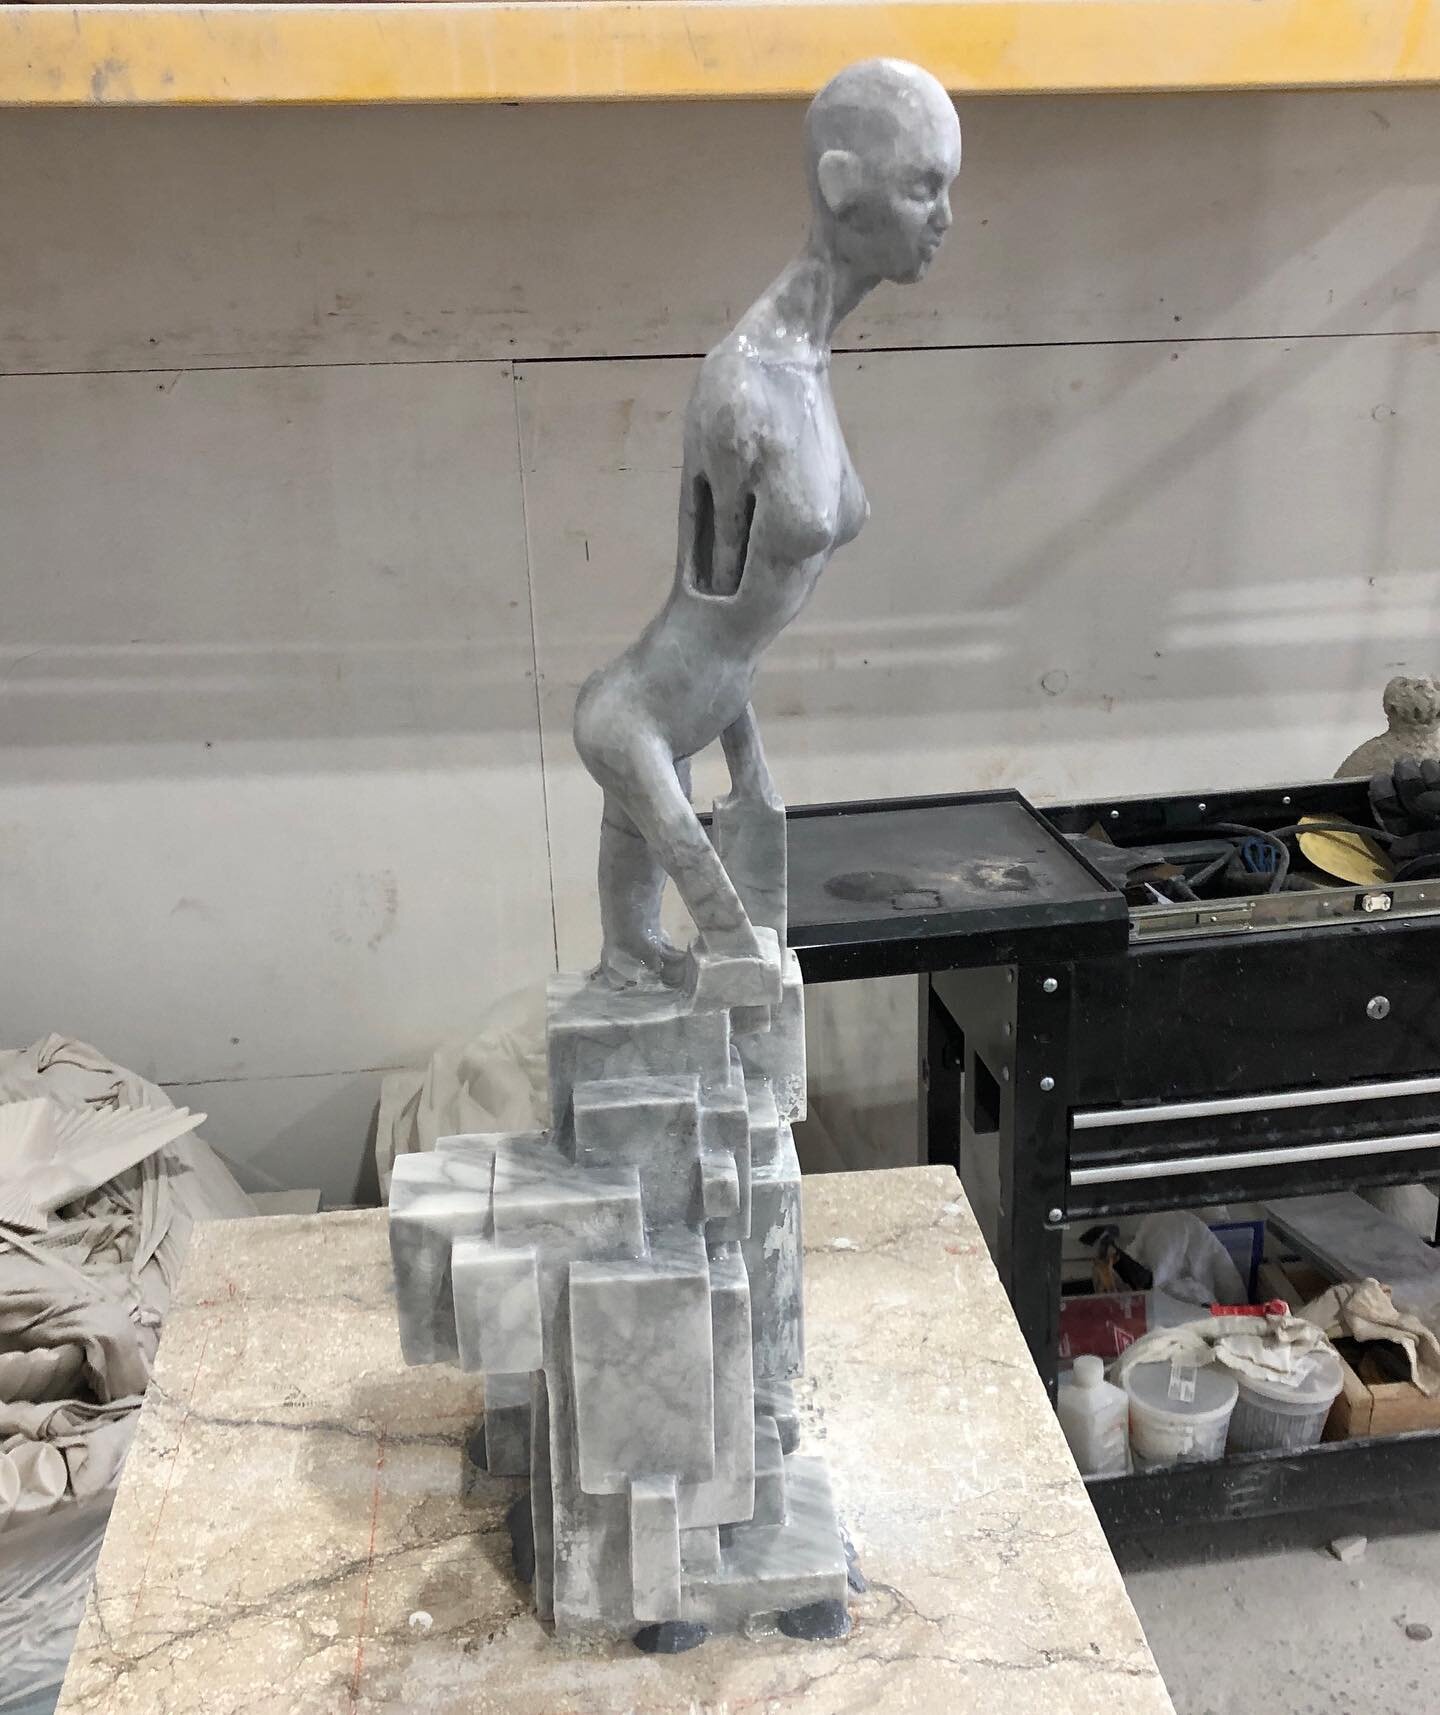 Starting to refine the forms and getting a little experimental with that arm @abcstone